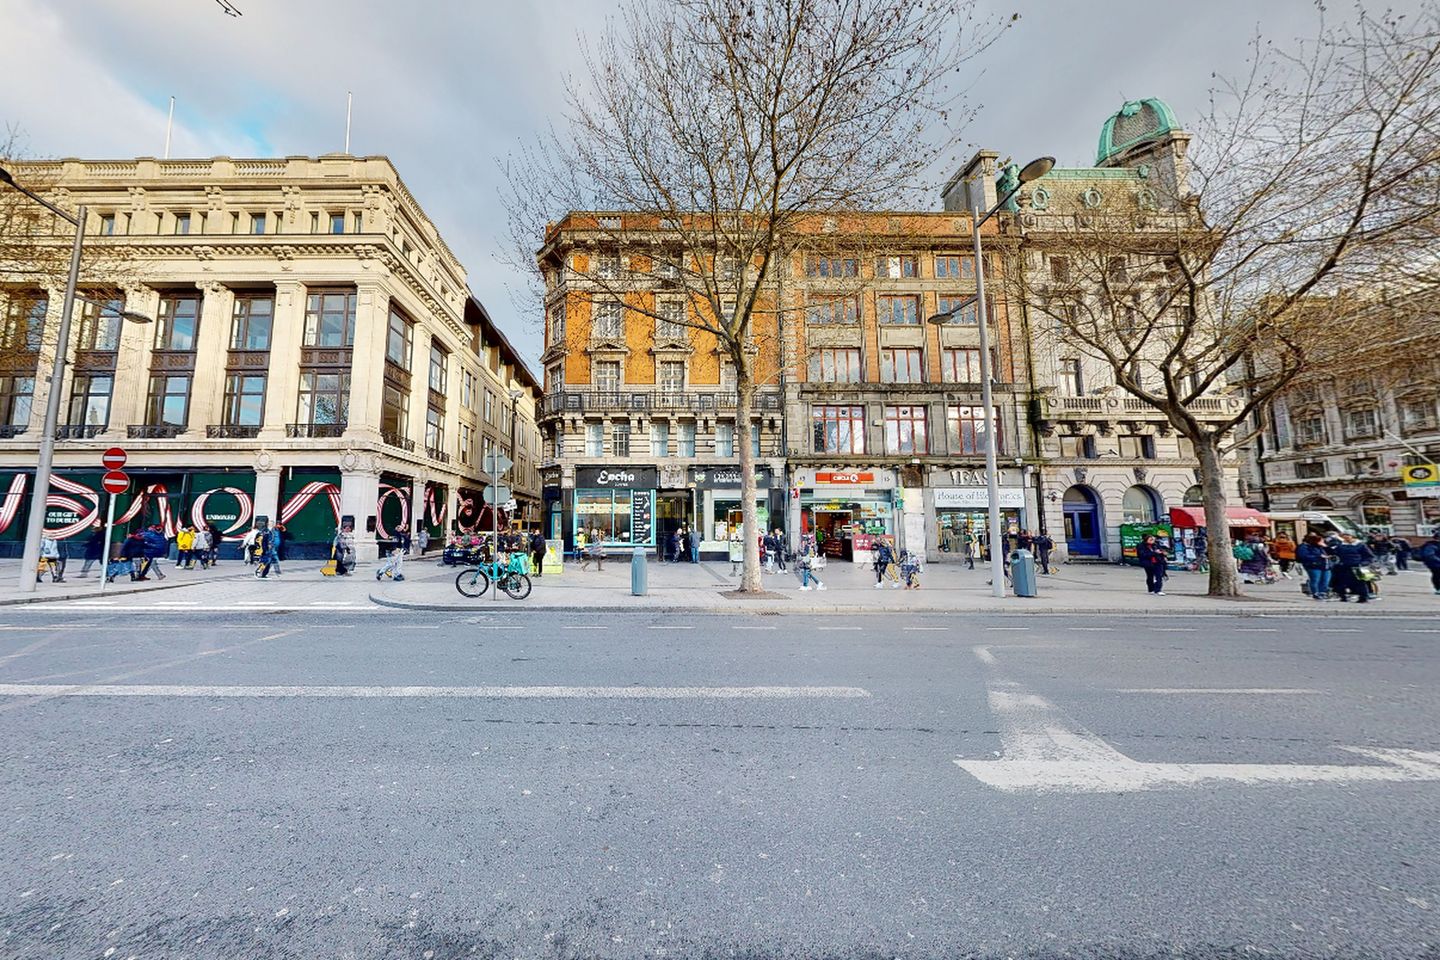 Educational / Office Space - Entire Building at 14/15 O'Connell Street Upper, Dublin 1